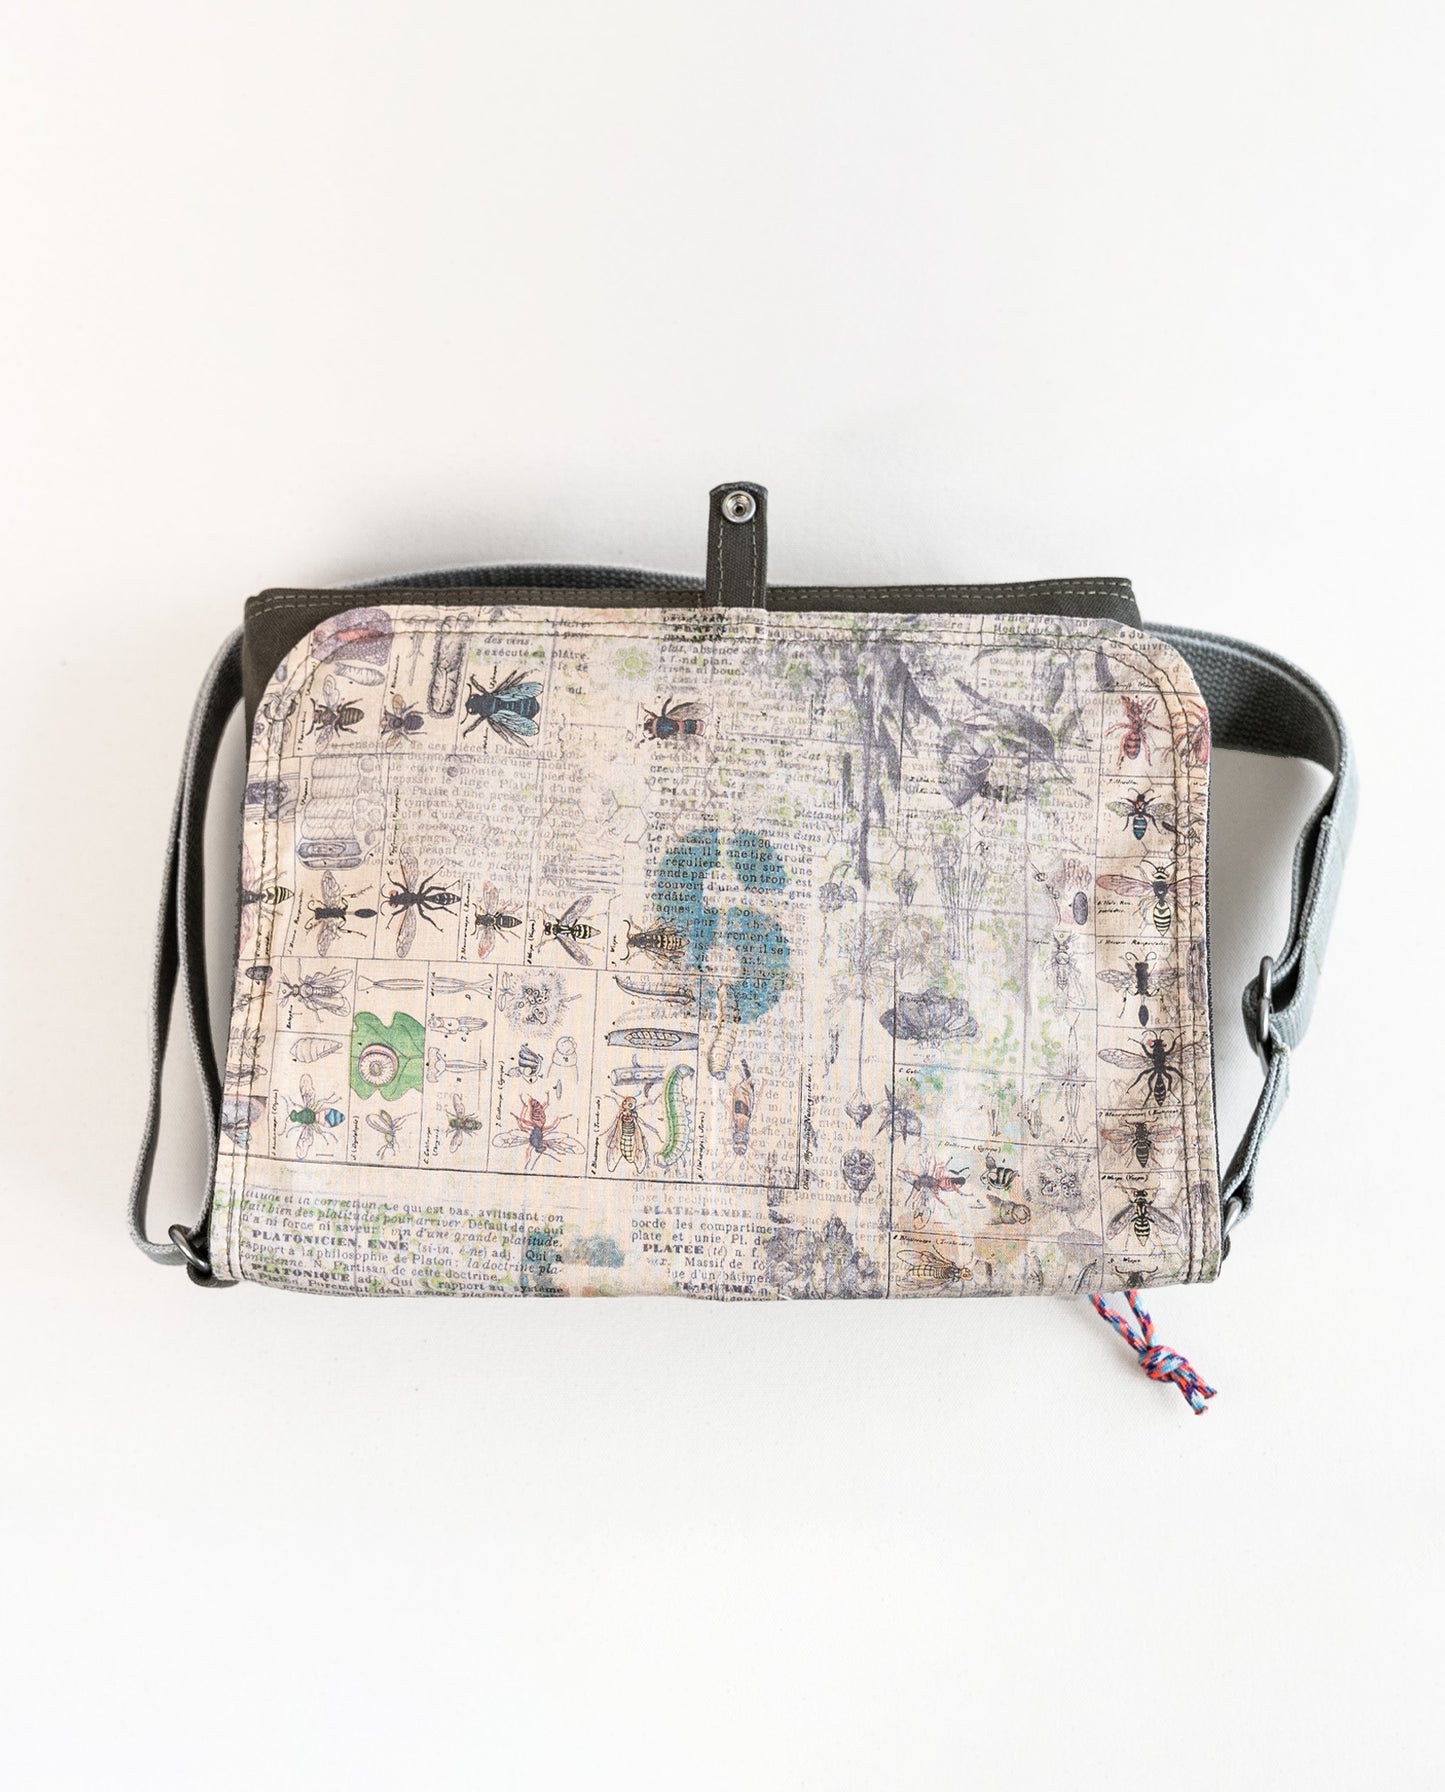 Inside of flap showing entomology print lining fabric of Dock 5’s Hummingbird Canvas Messenger Bag in olive featuring art from owner Natalija Walbridge